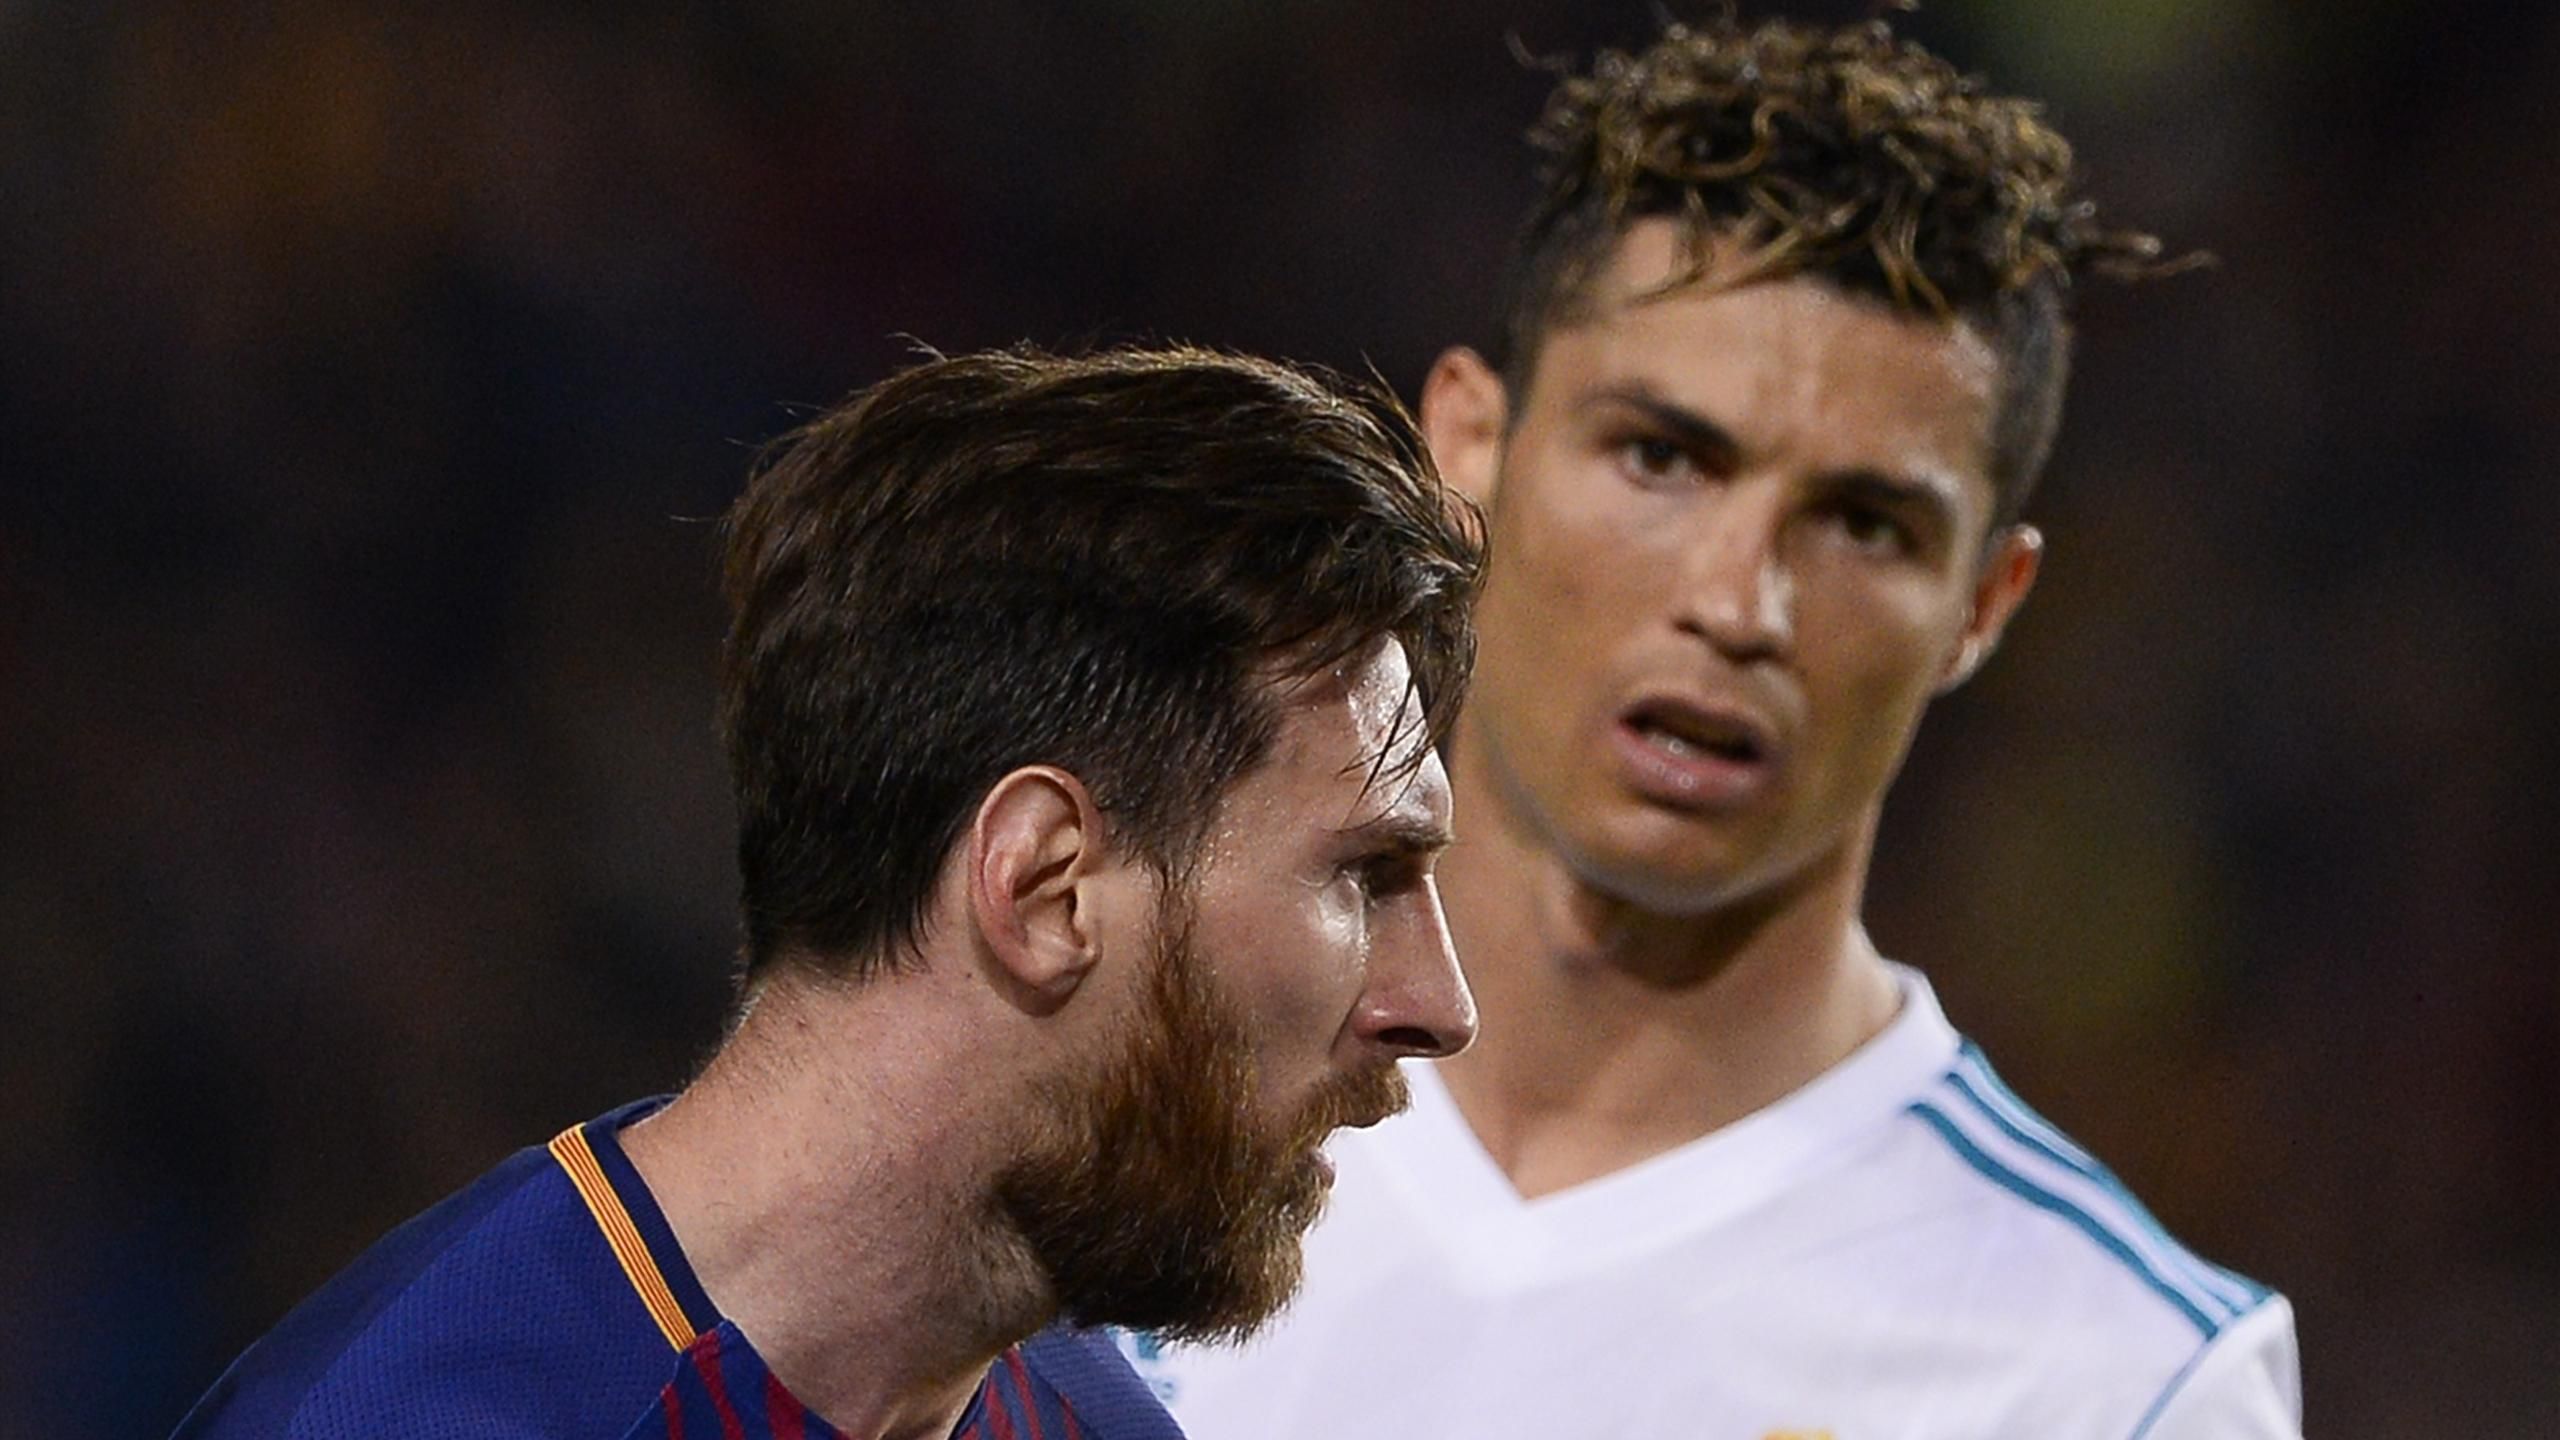 Messi and Ronaldo Have New Teams, but Soccer's Same Problems